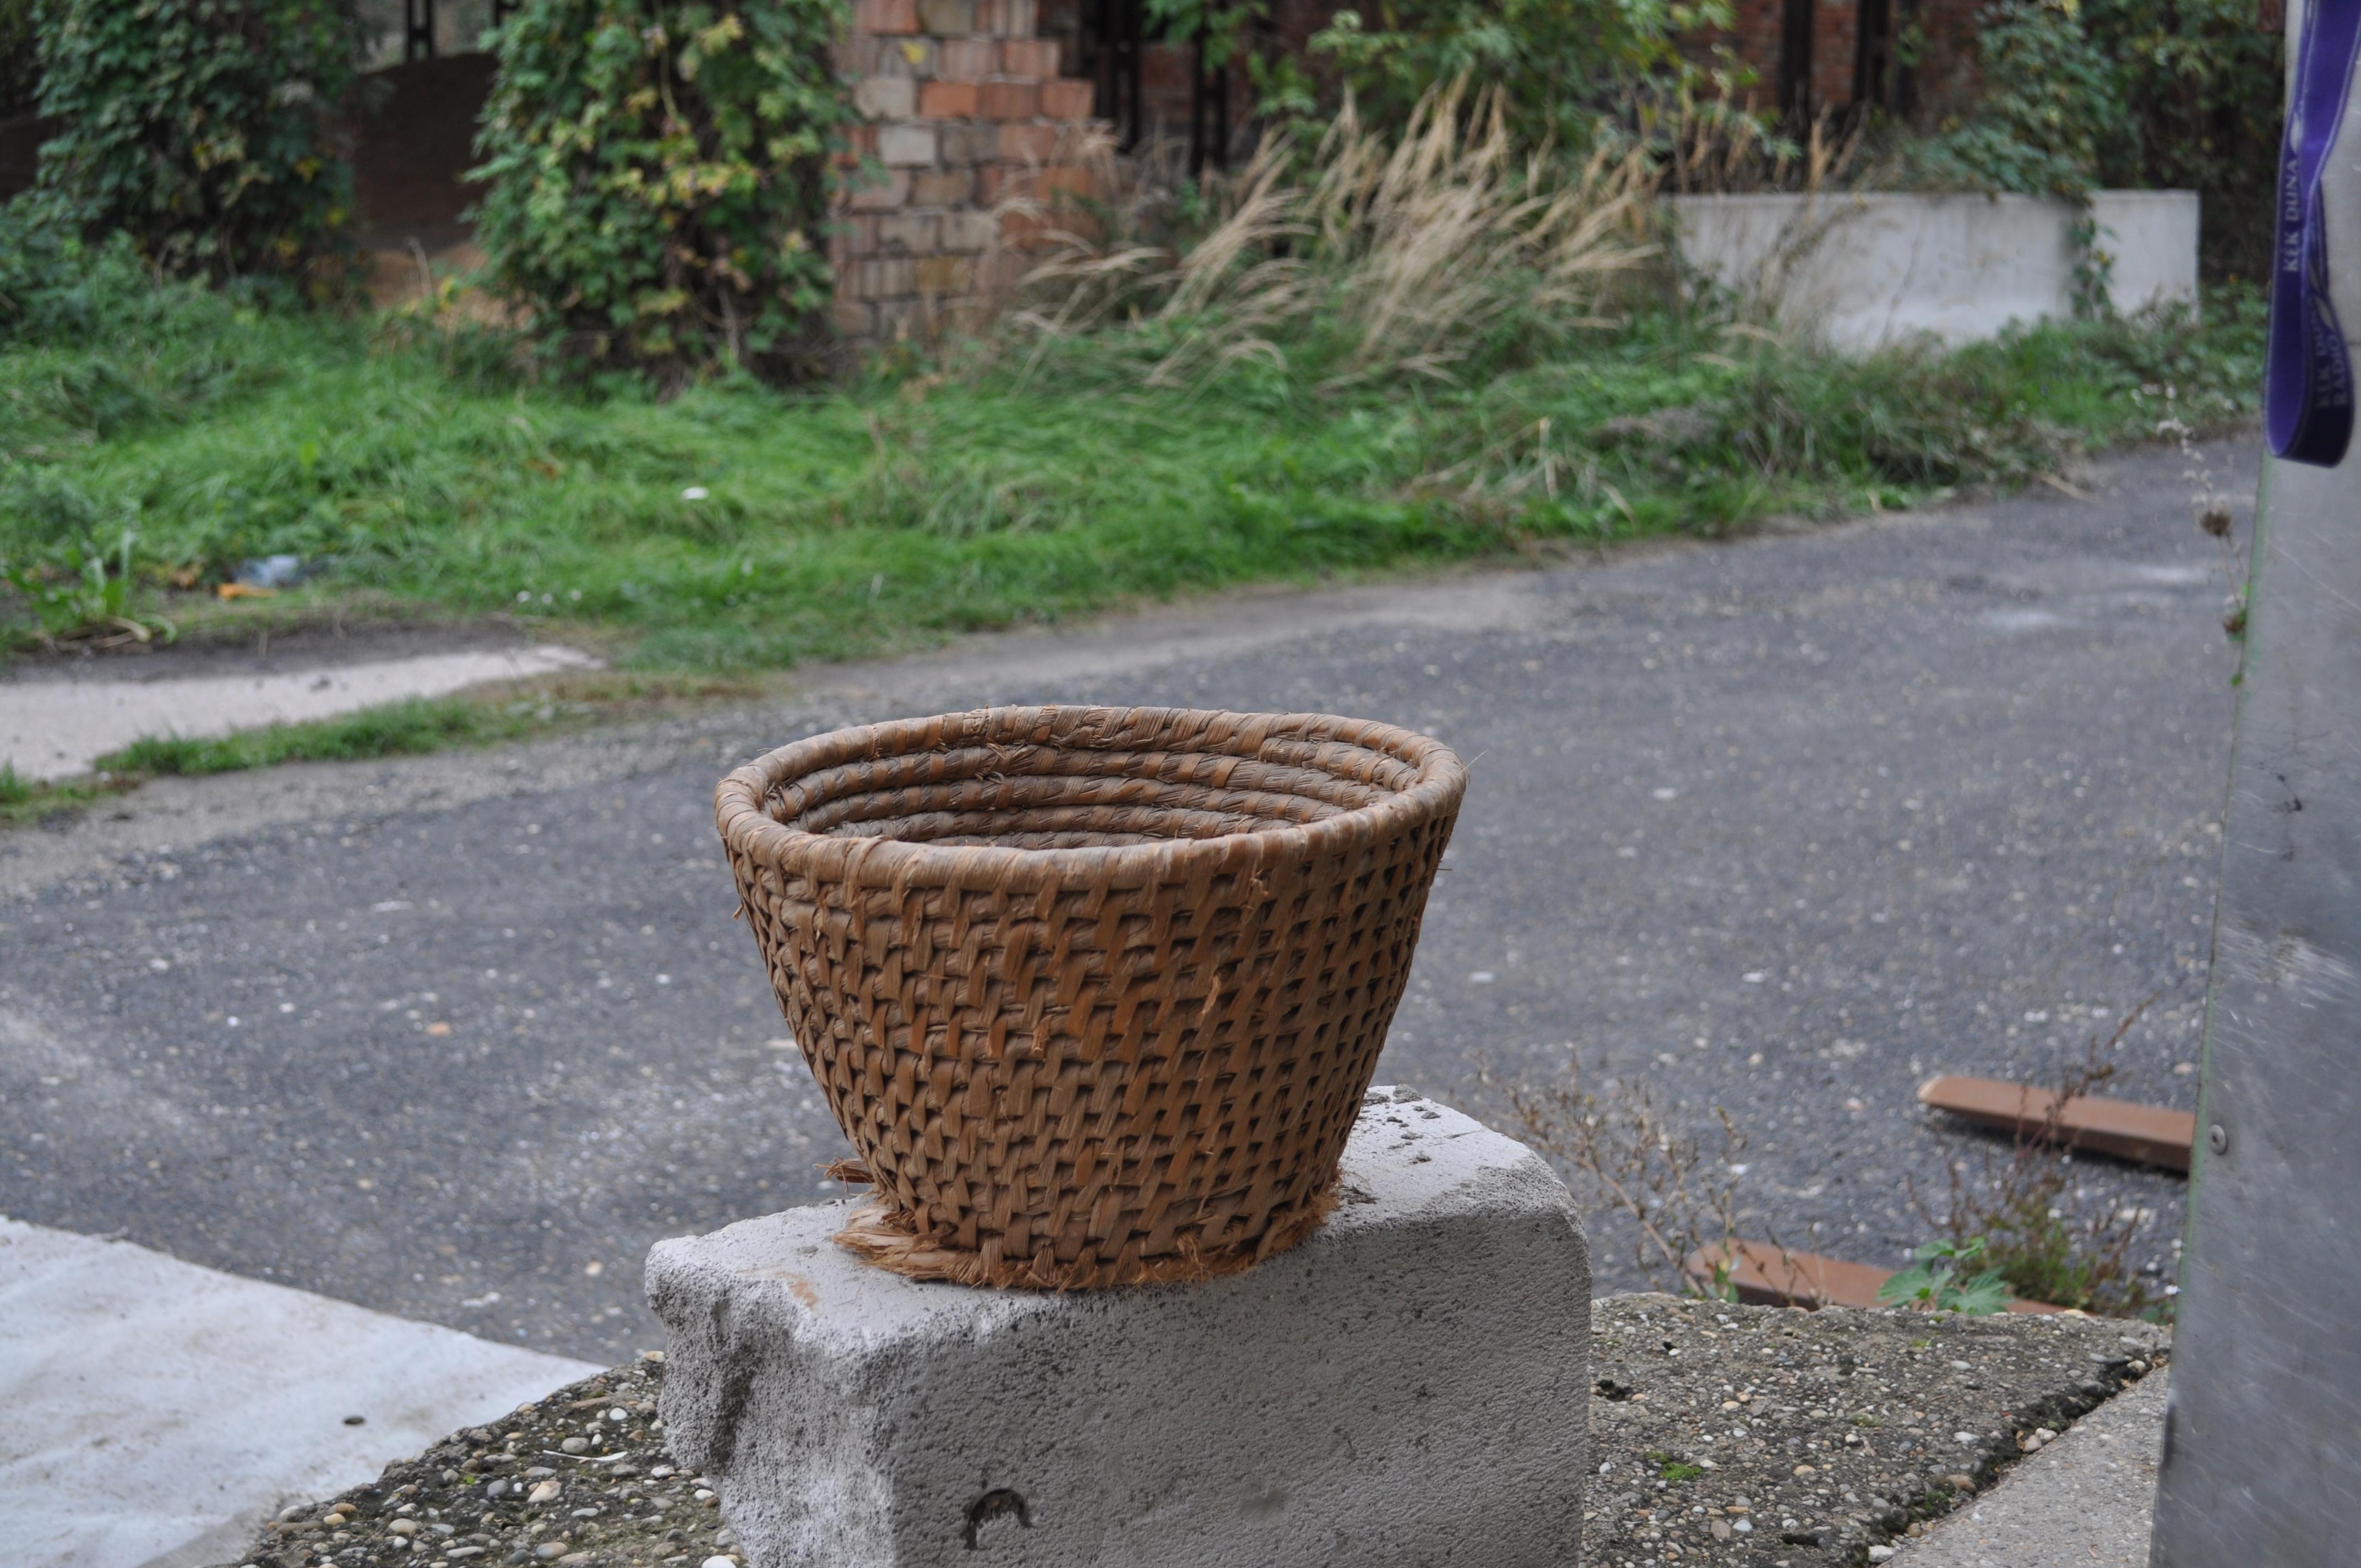 Woven rye basket for egg gathering found in France.